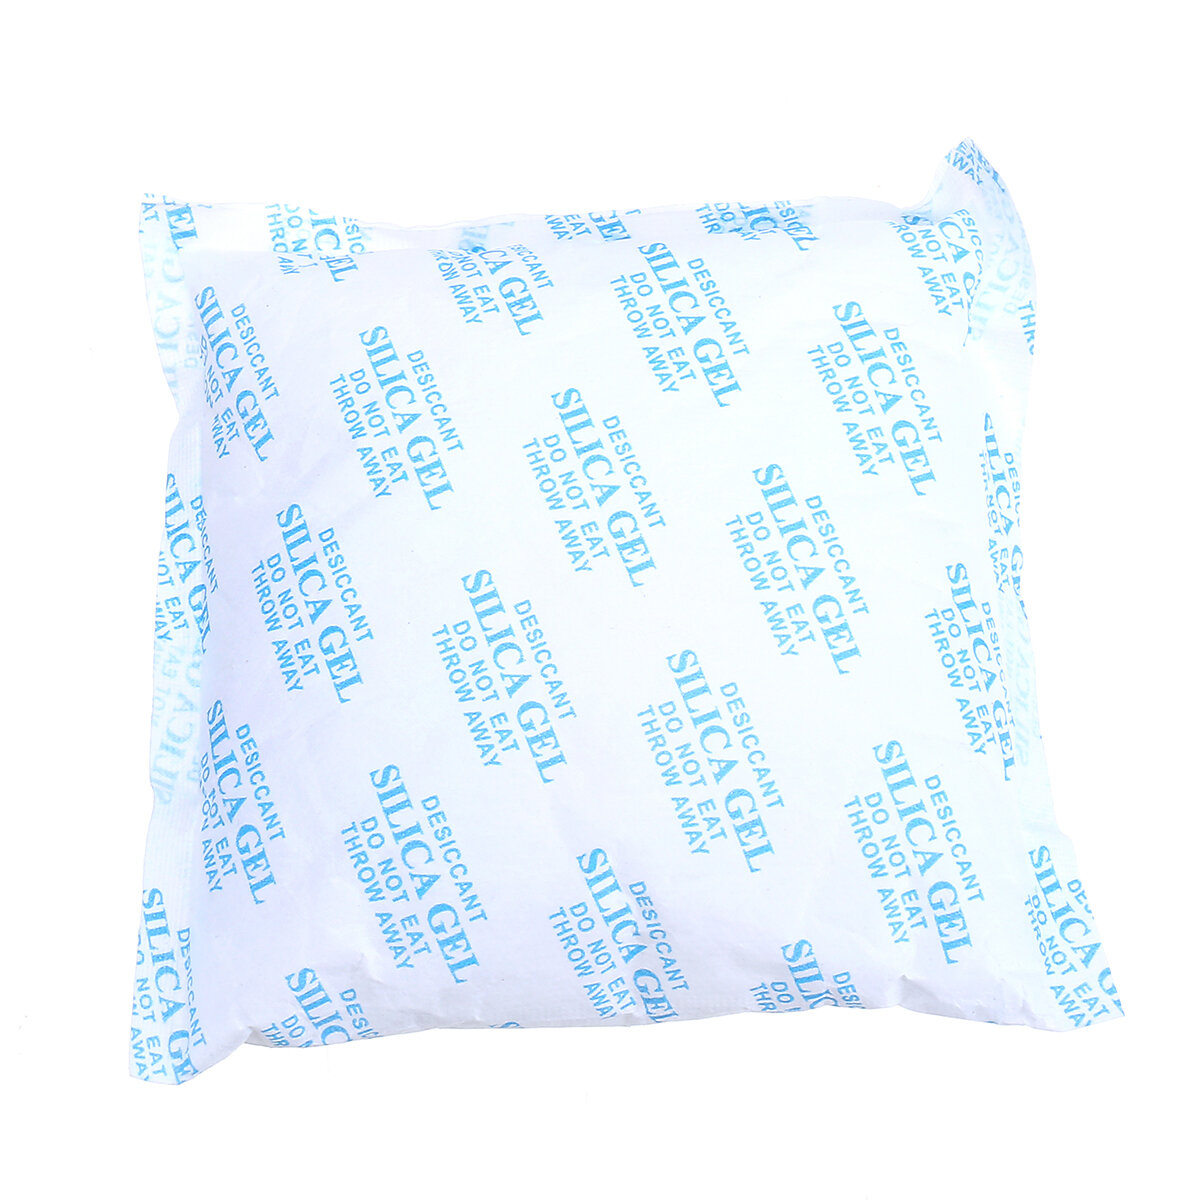 

250g/Pack Silica Gel Desiccant Dehumidifier Dry Moisture Absorber Non-woven Fabric Packet Bag